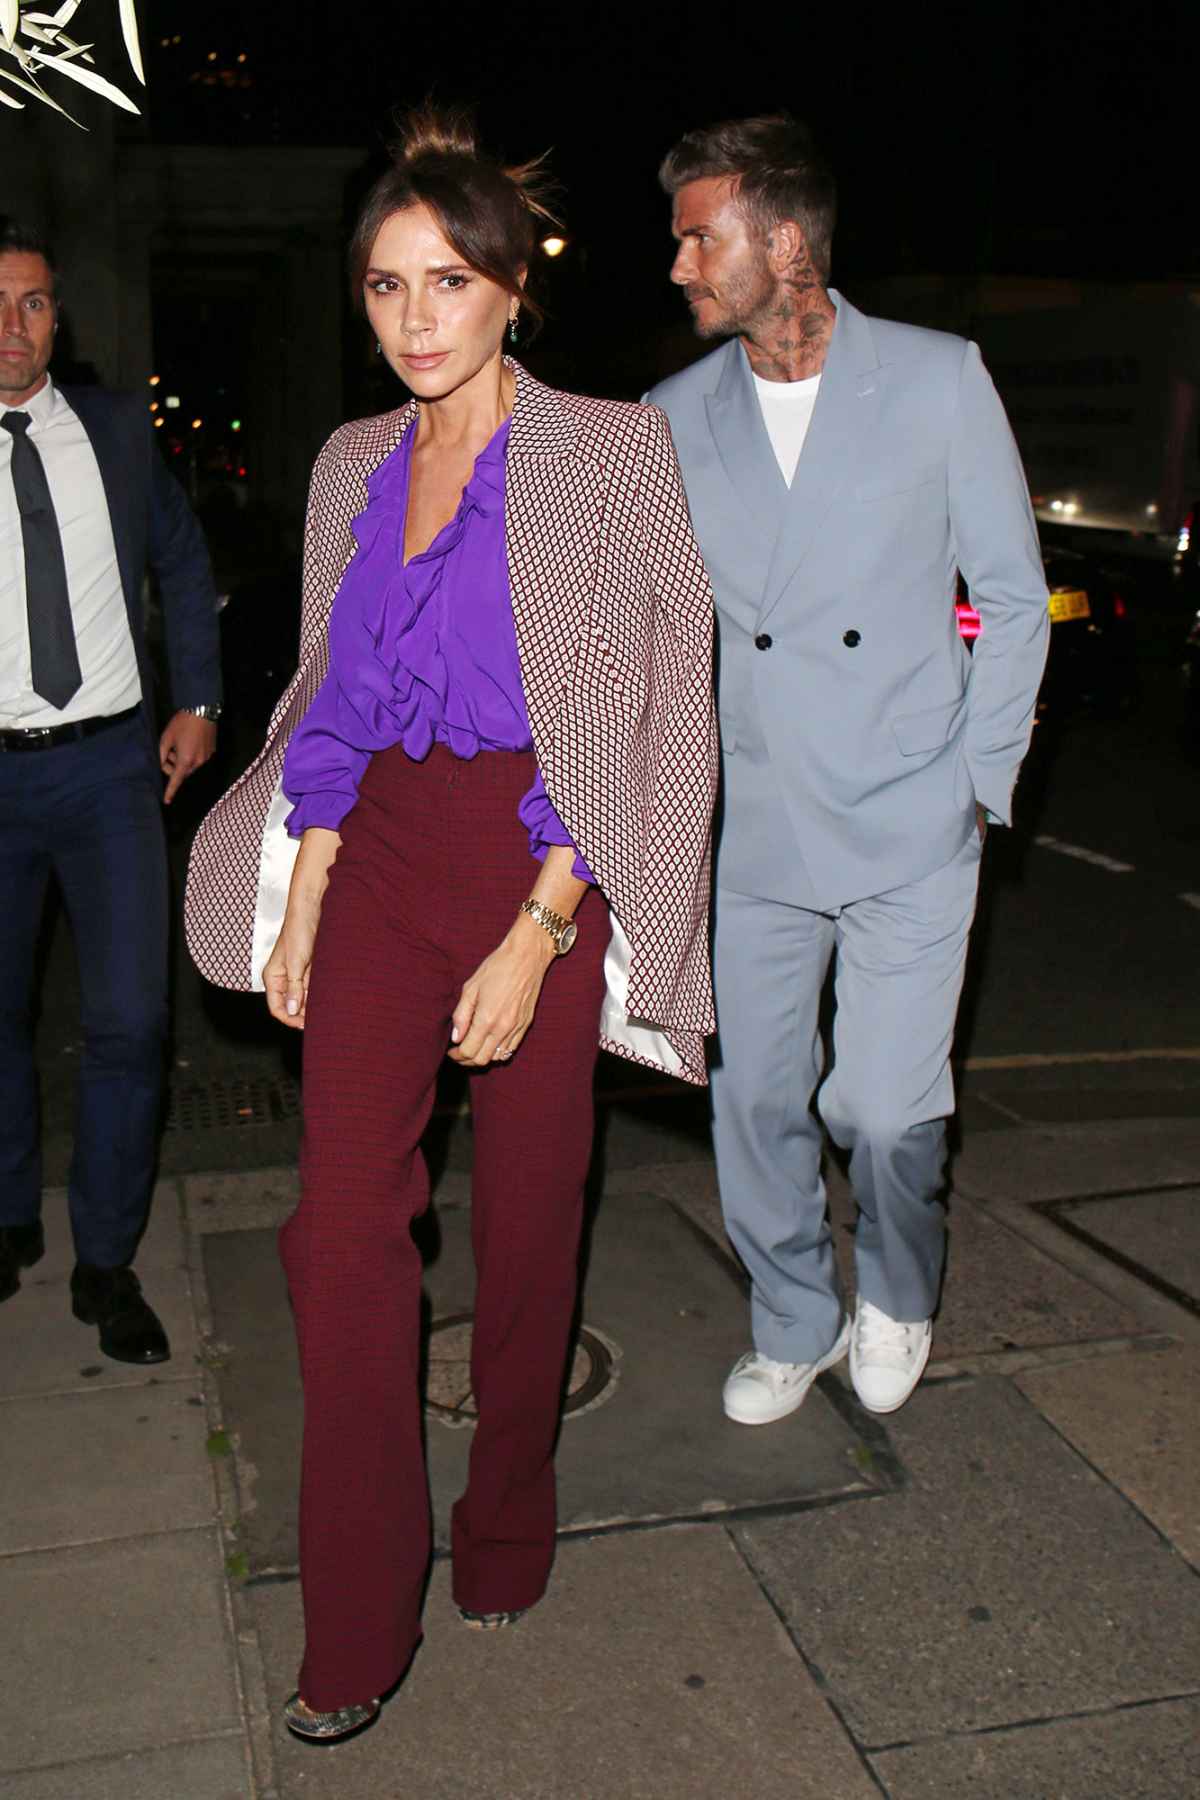 Victoria Beckham and David Beckham's Date Night Style at the